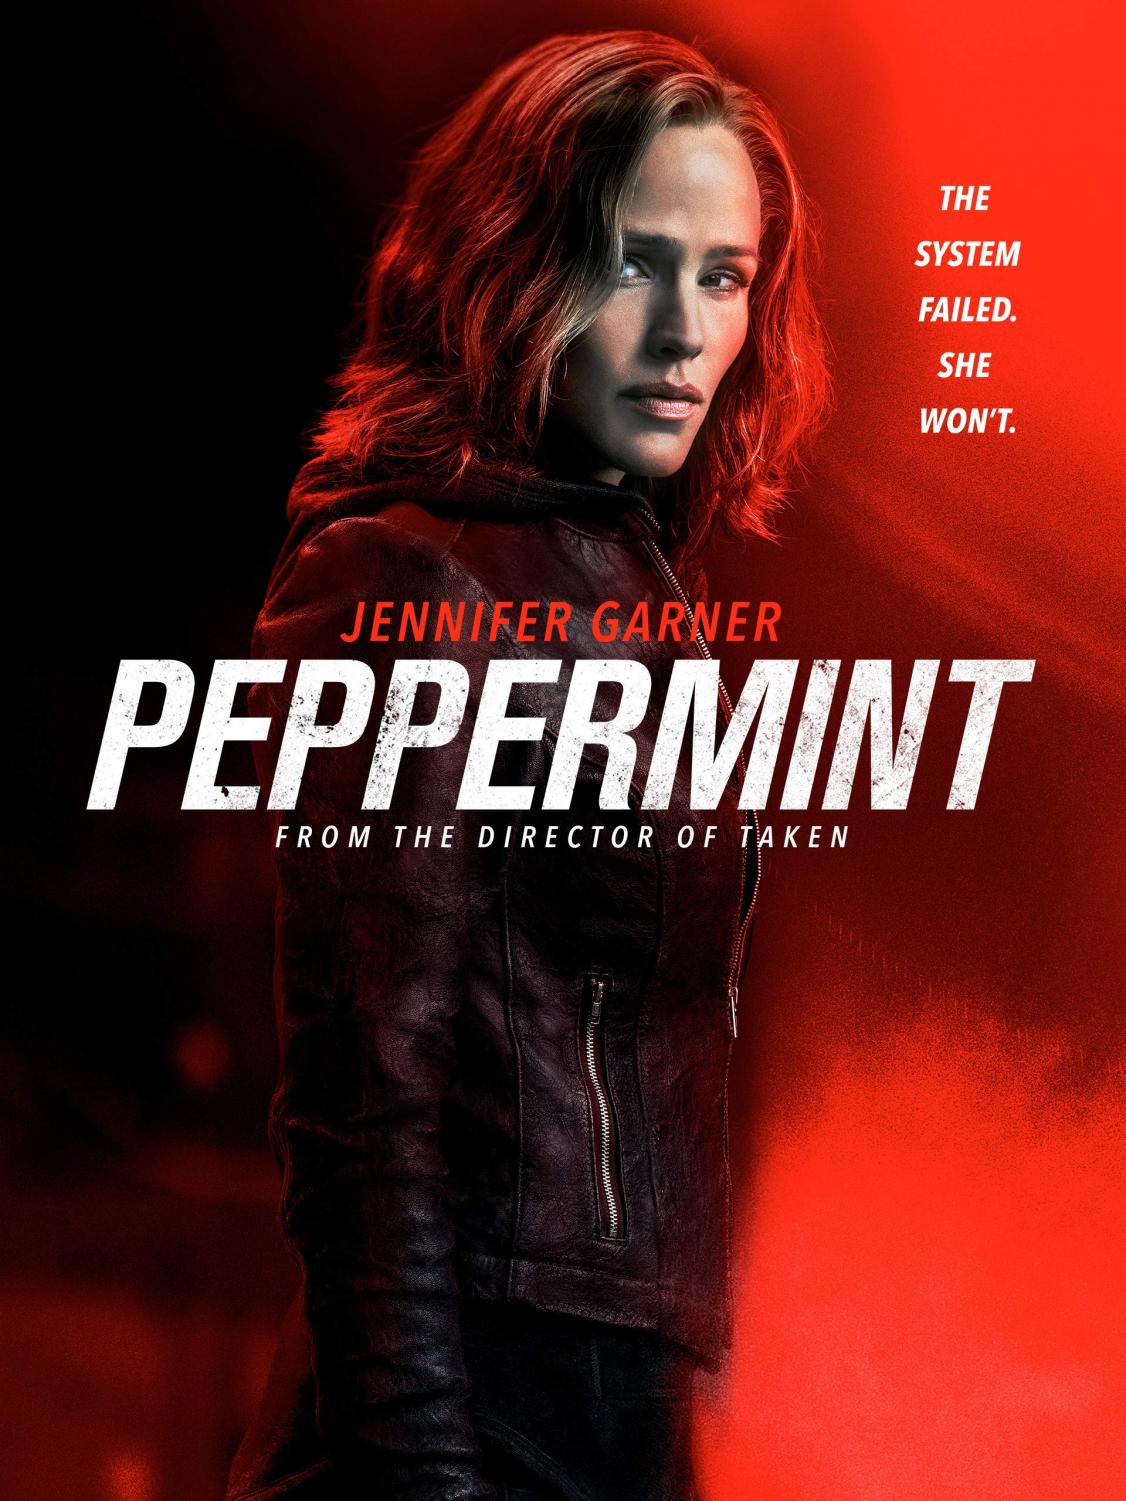 Peppermint” is definitely worth the watch – Beaver Tales